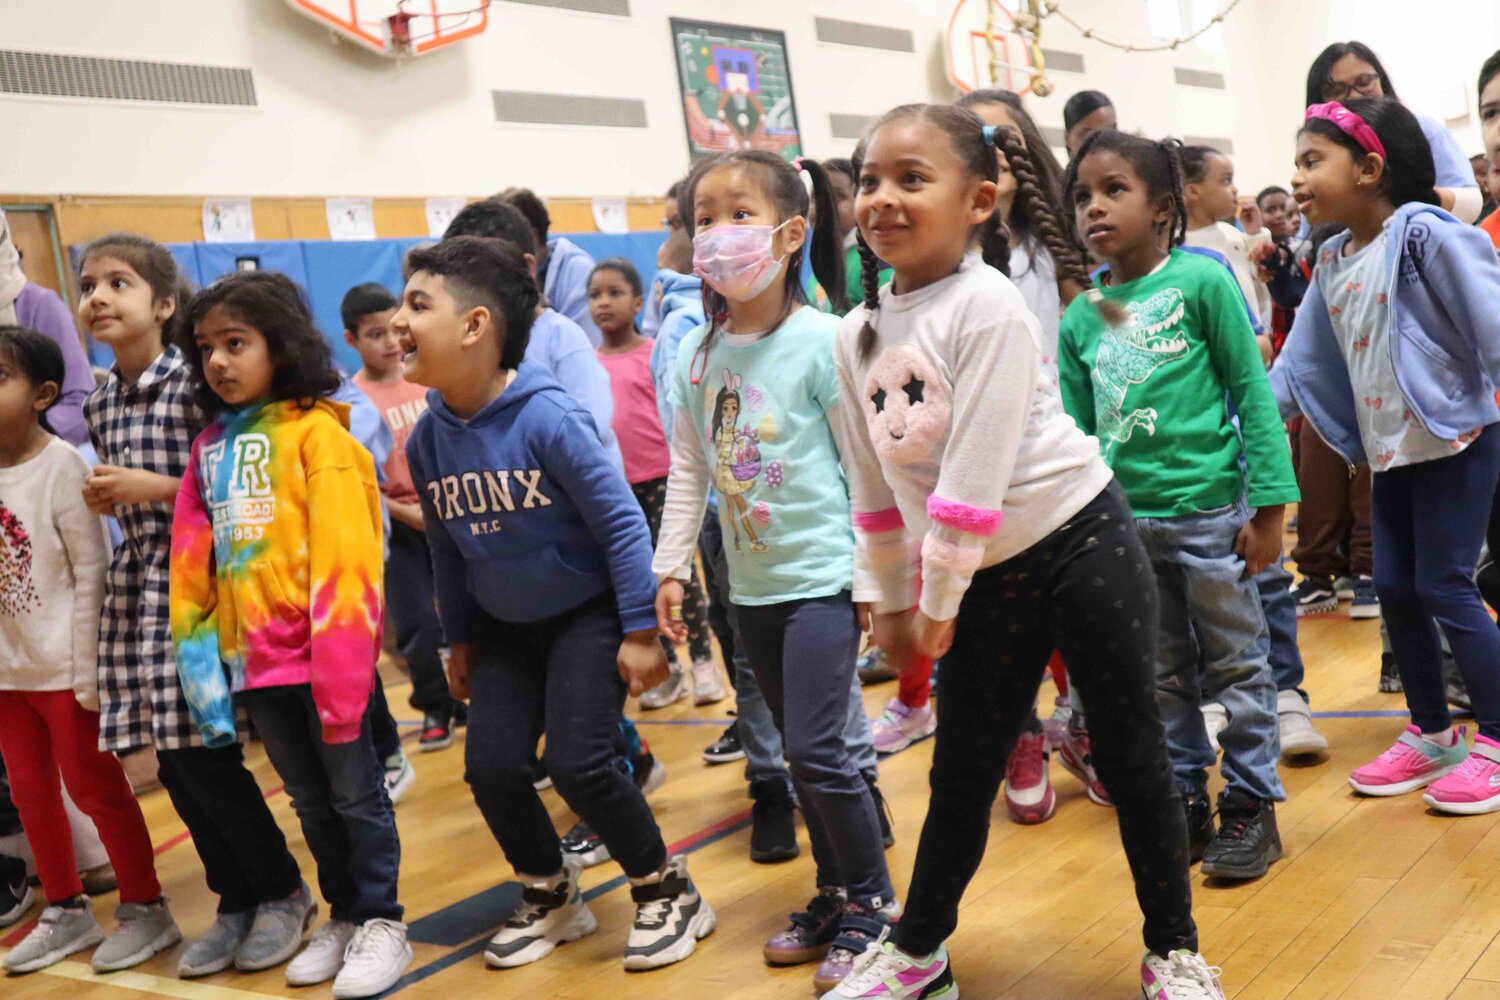 Forest Road School turns up the fun at pep rally Herald Community